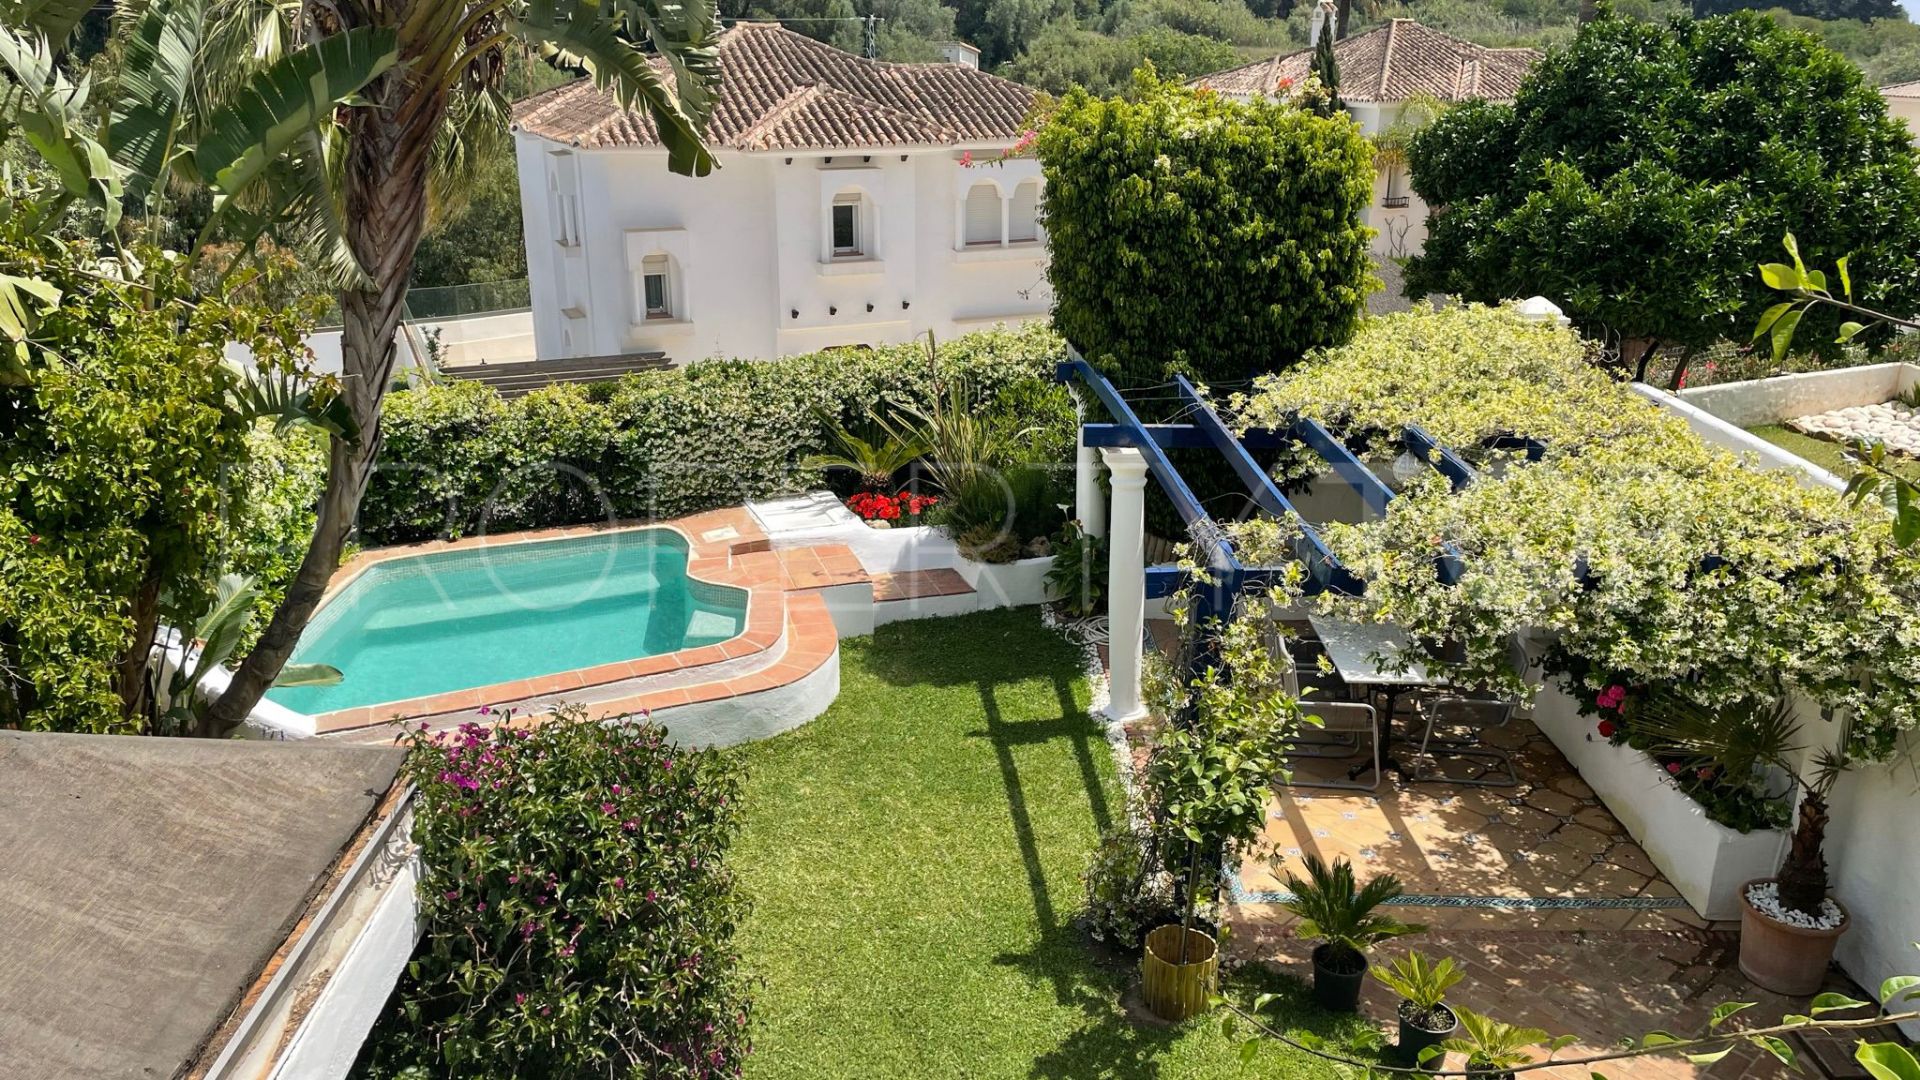 5 bedrooms town house in Nueva Andalucia for sale